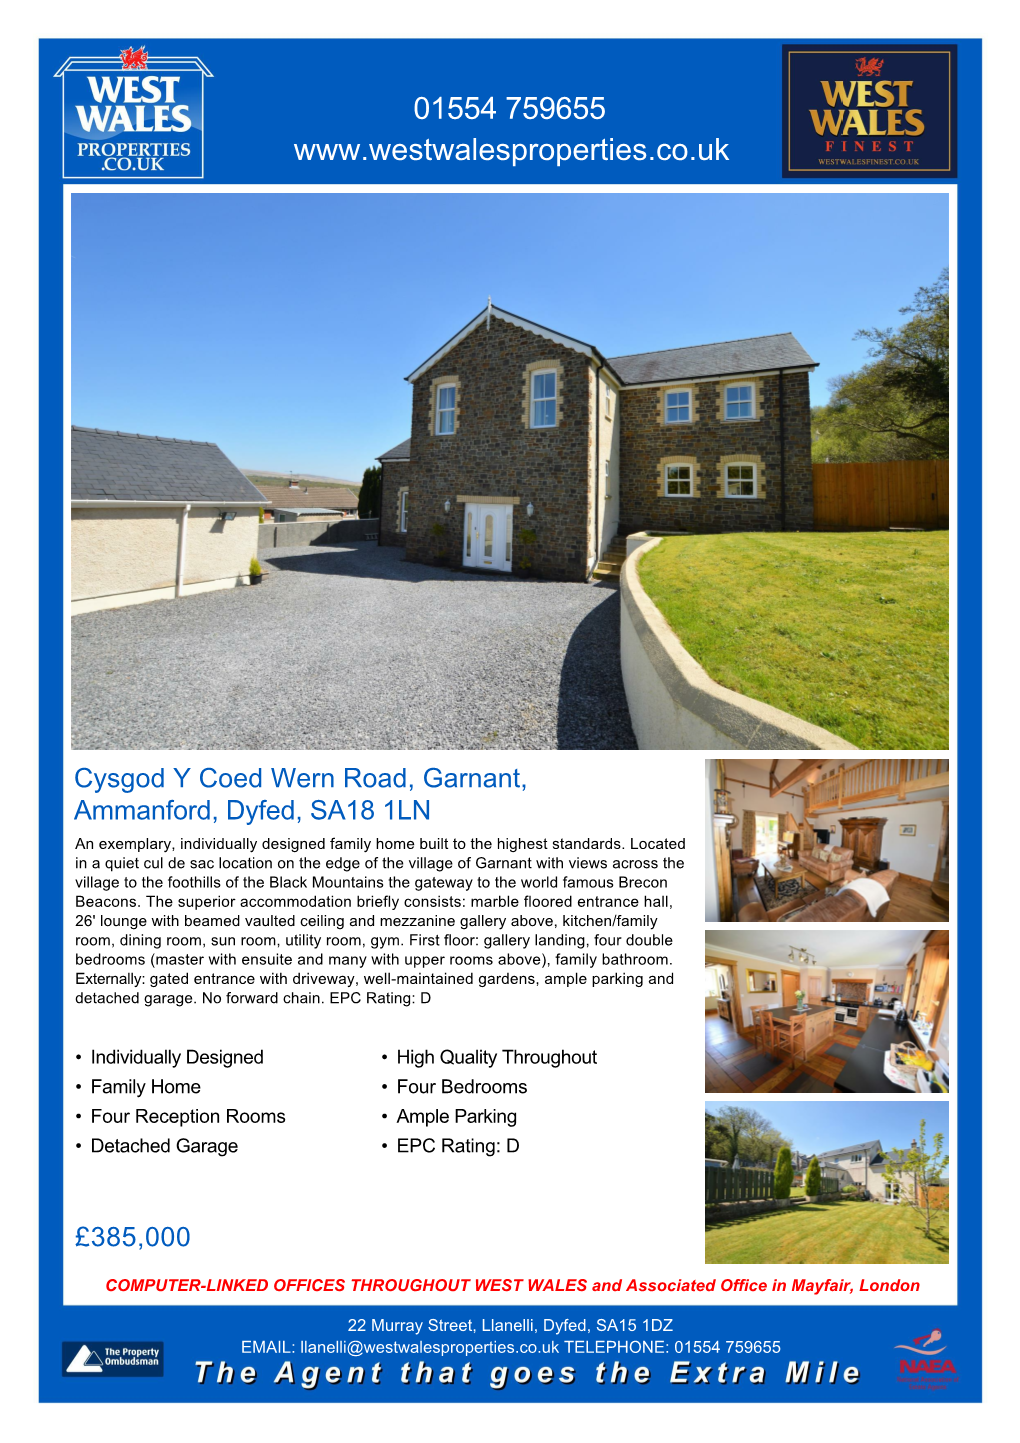 Cysgod Y Coed Wern Road, Garnant, Ammanford, Dyfed, SA18 1LN an Exemplary, Individually Designed Family Home Built to the Highest Standards